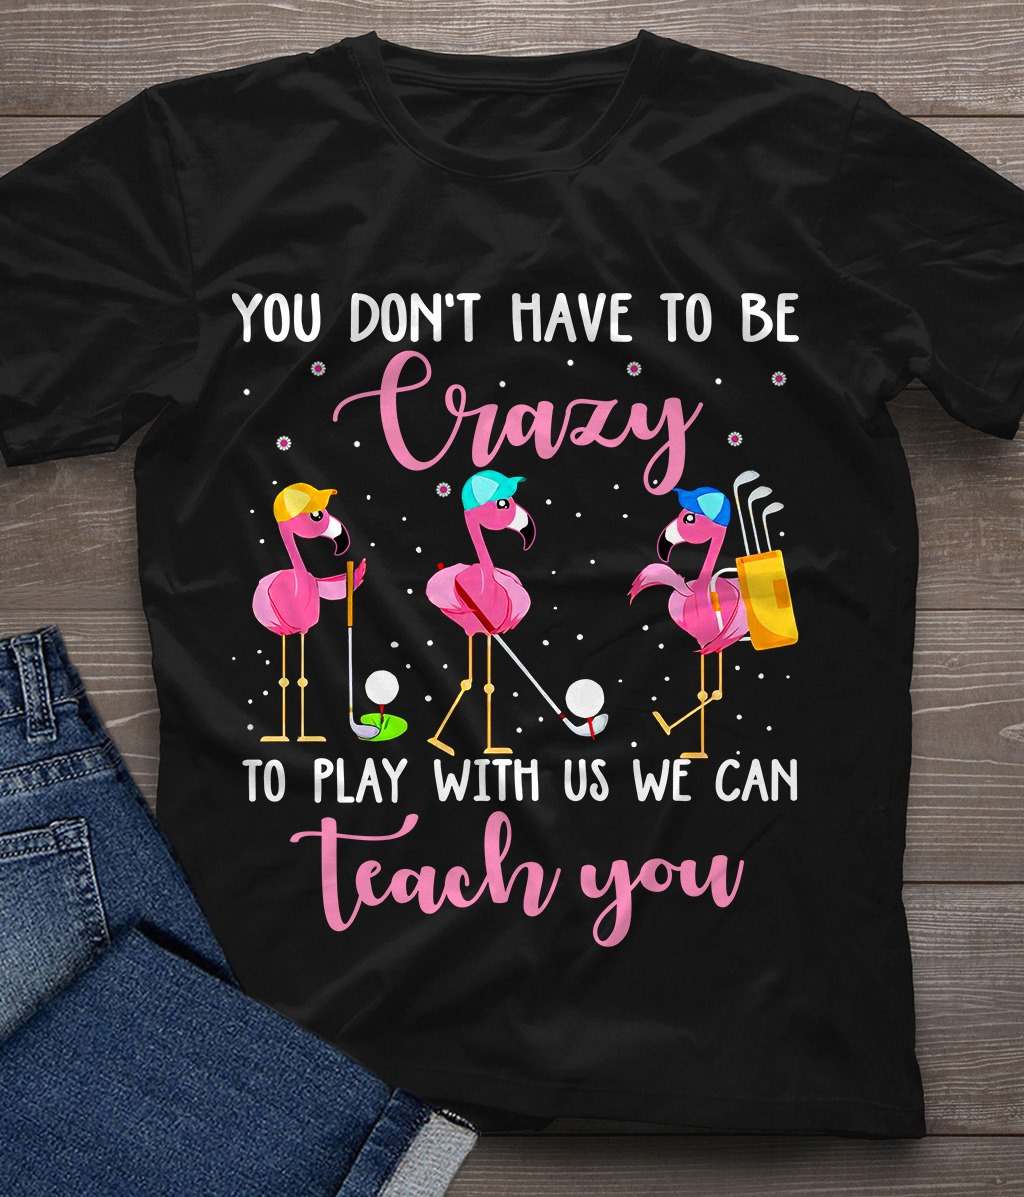 You don't have to be crazy to play with us we can teach you - Flamingo playing golf